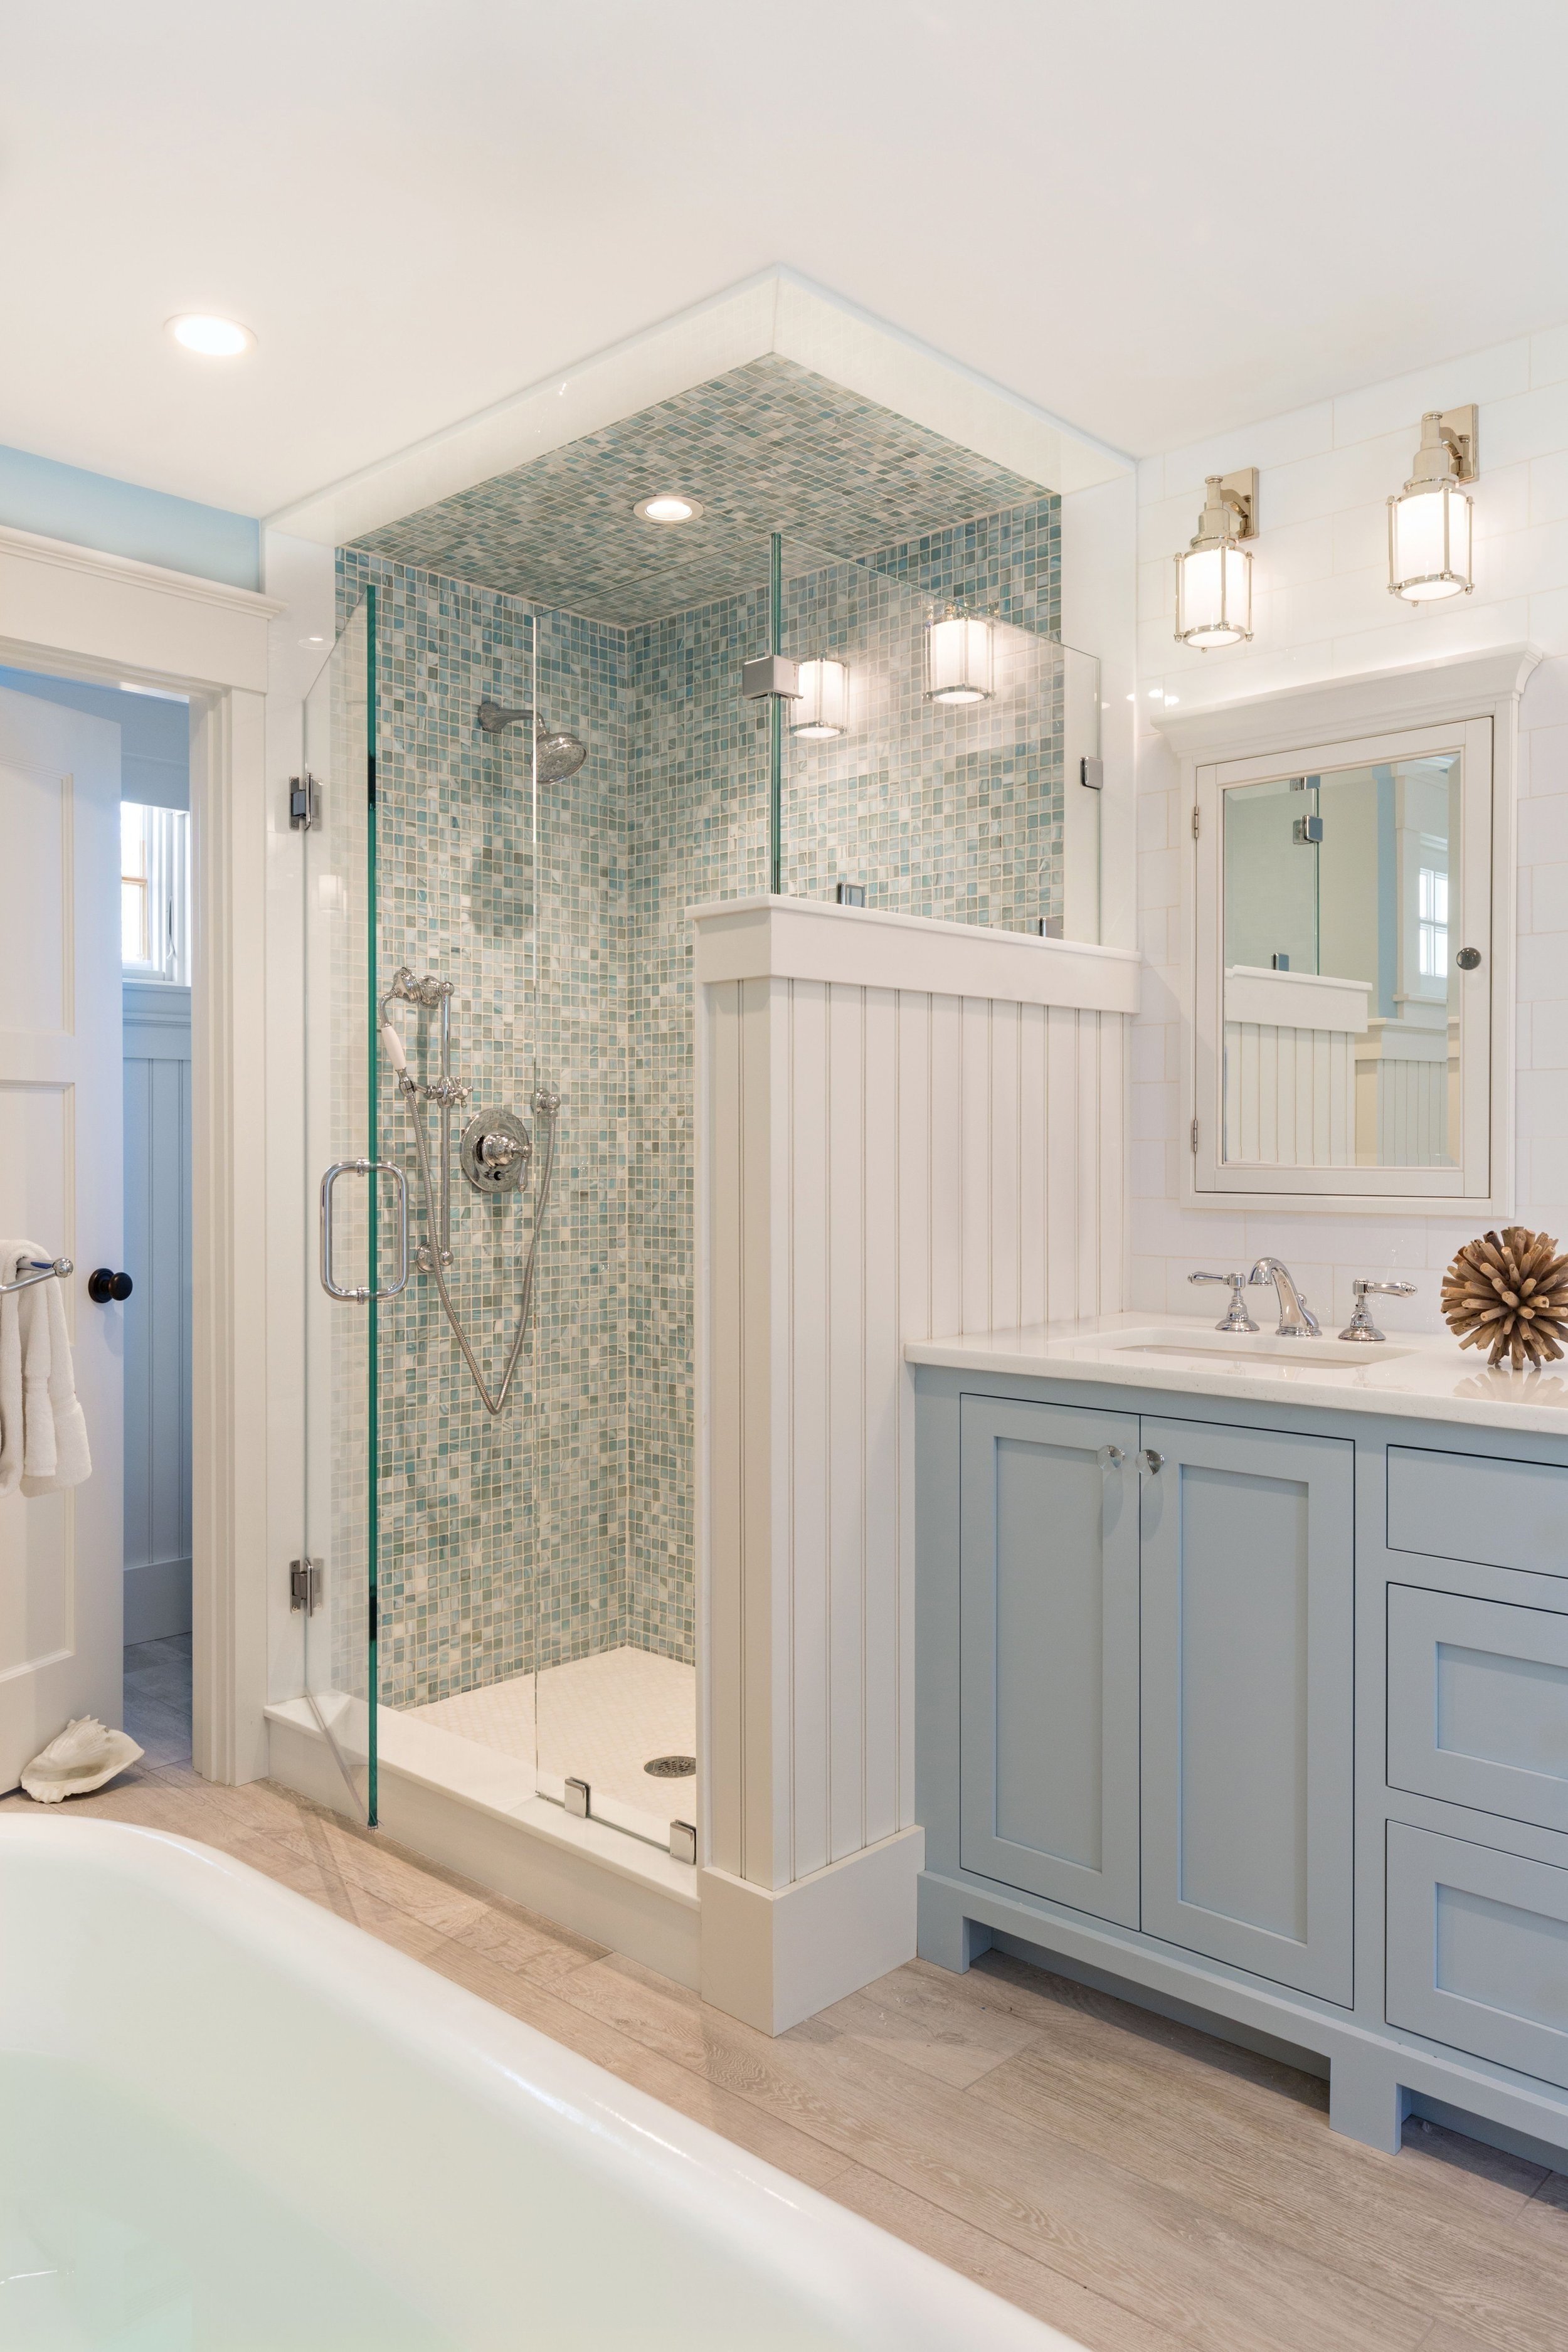 The salty waters of Nantucket Harbor after the fog clears can inform the blue-grey shade of a bathroom vanity. Make it yours with Smoke 2122-40.